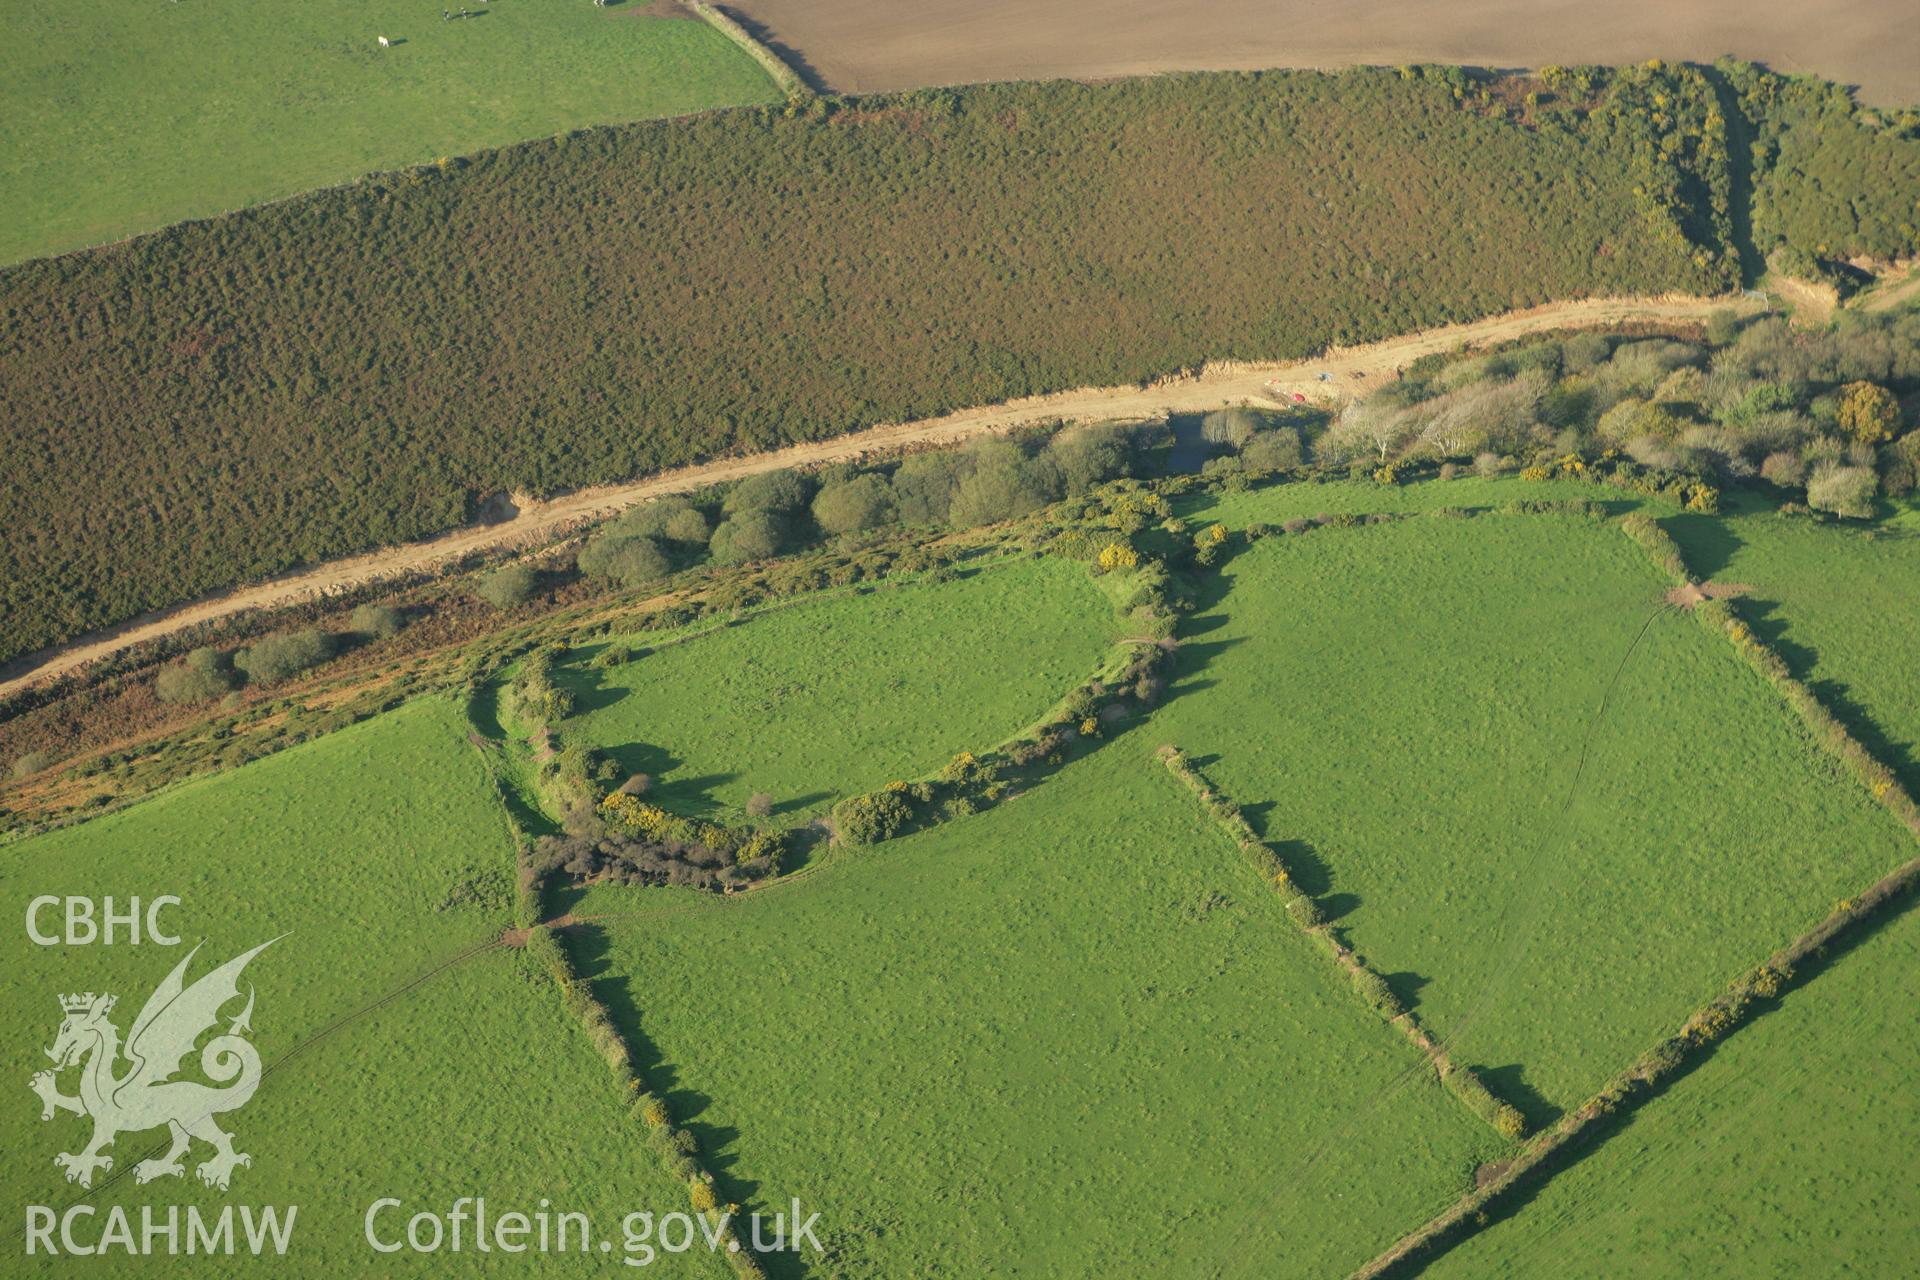 RCAHMW colour oblique photograph of Cuffern Mountain enclosure;Slade camp. Taken by Toby Driver on 23/10/2007.